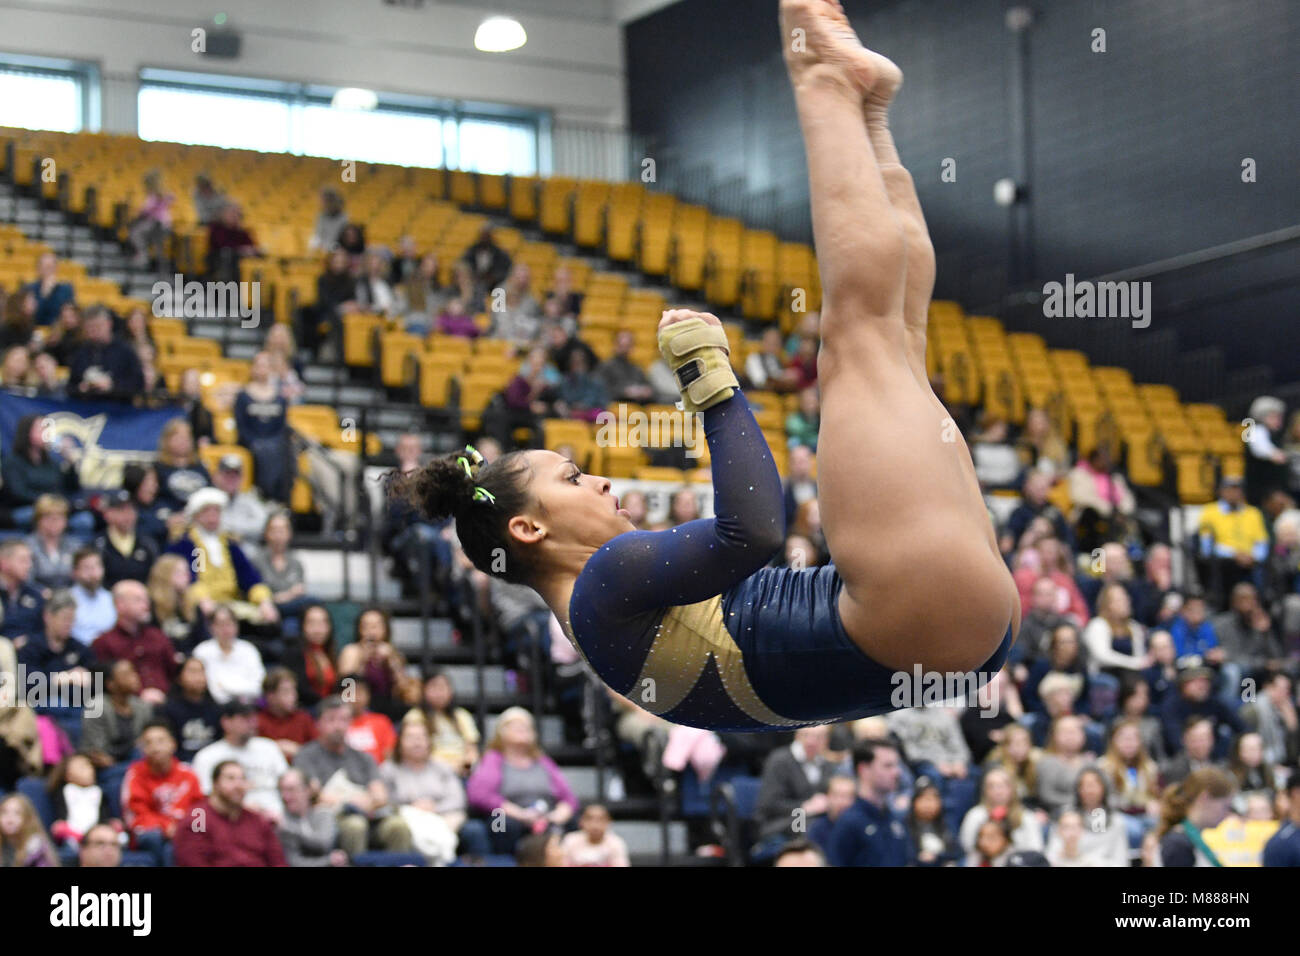 March 11, 2017 - Washington, District of Columbia, U.S - WVU gymnast ERICA FONTAINE competes on floor exercise during a tri-meet hosted by GWU in Washington, DC. (Credit Image: © Ken Inness via ZUMA Wire) Stock Photo